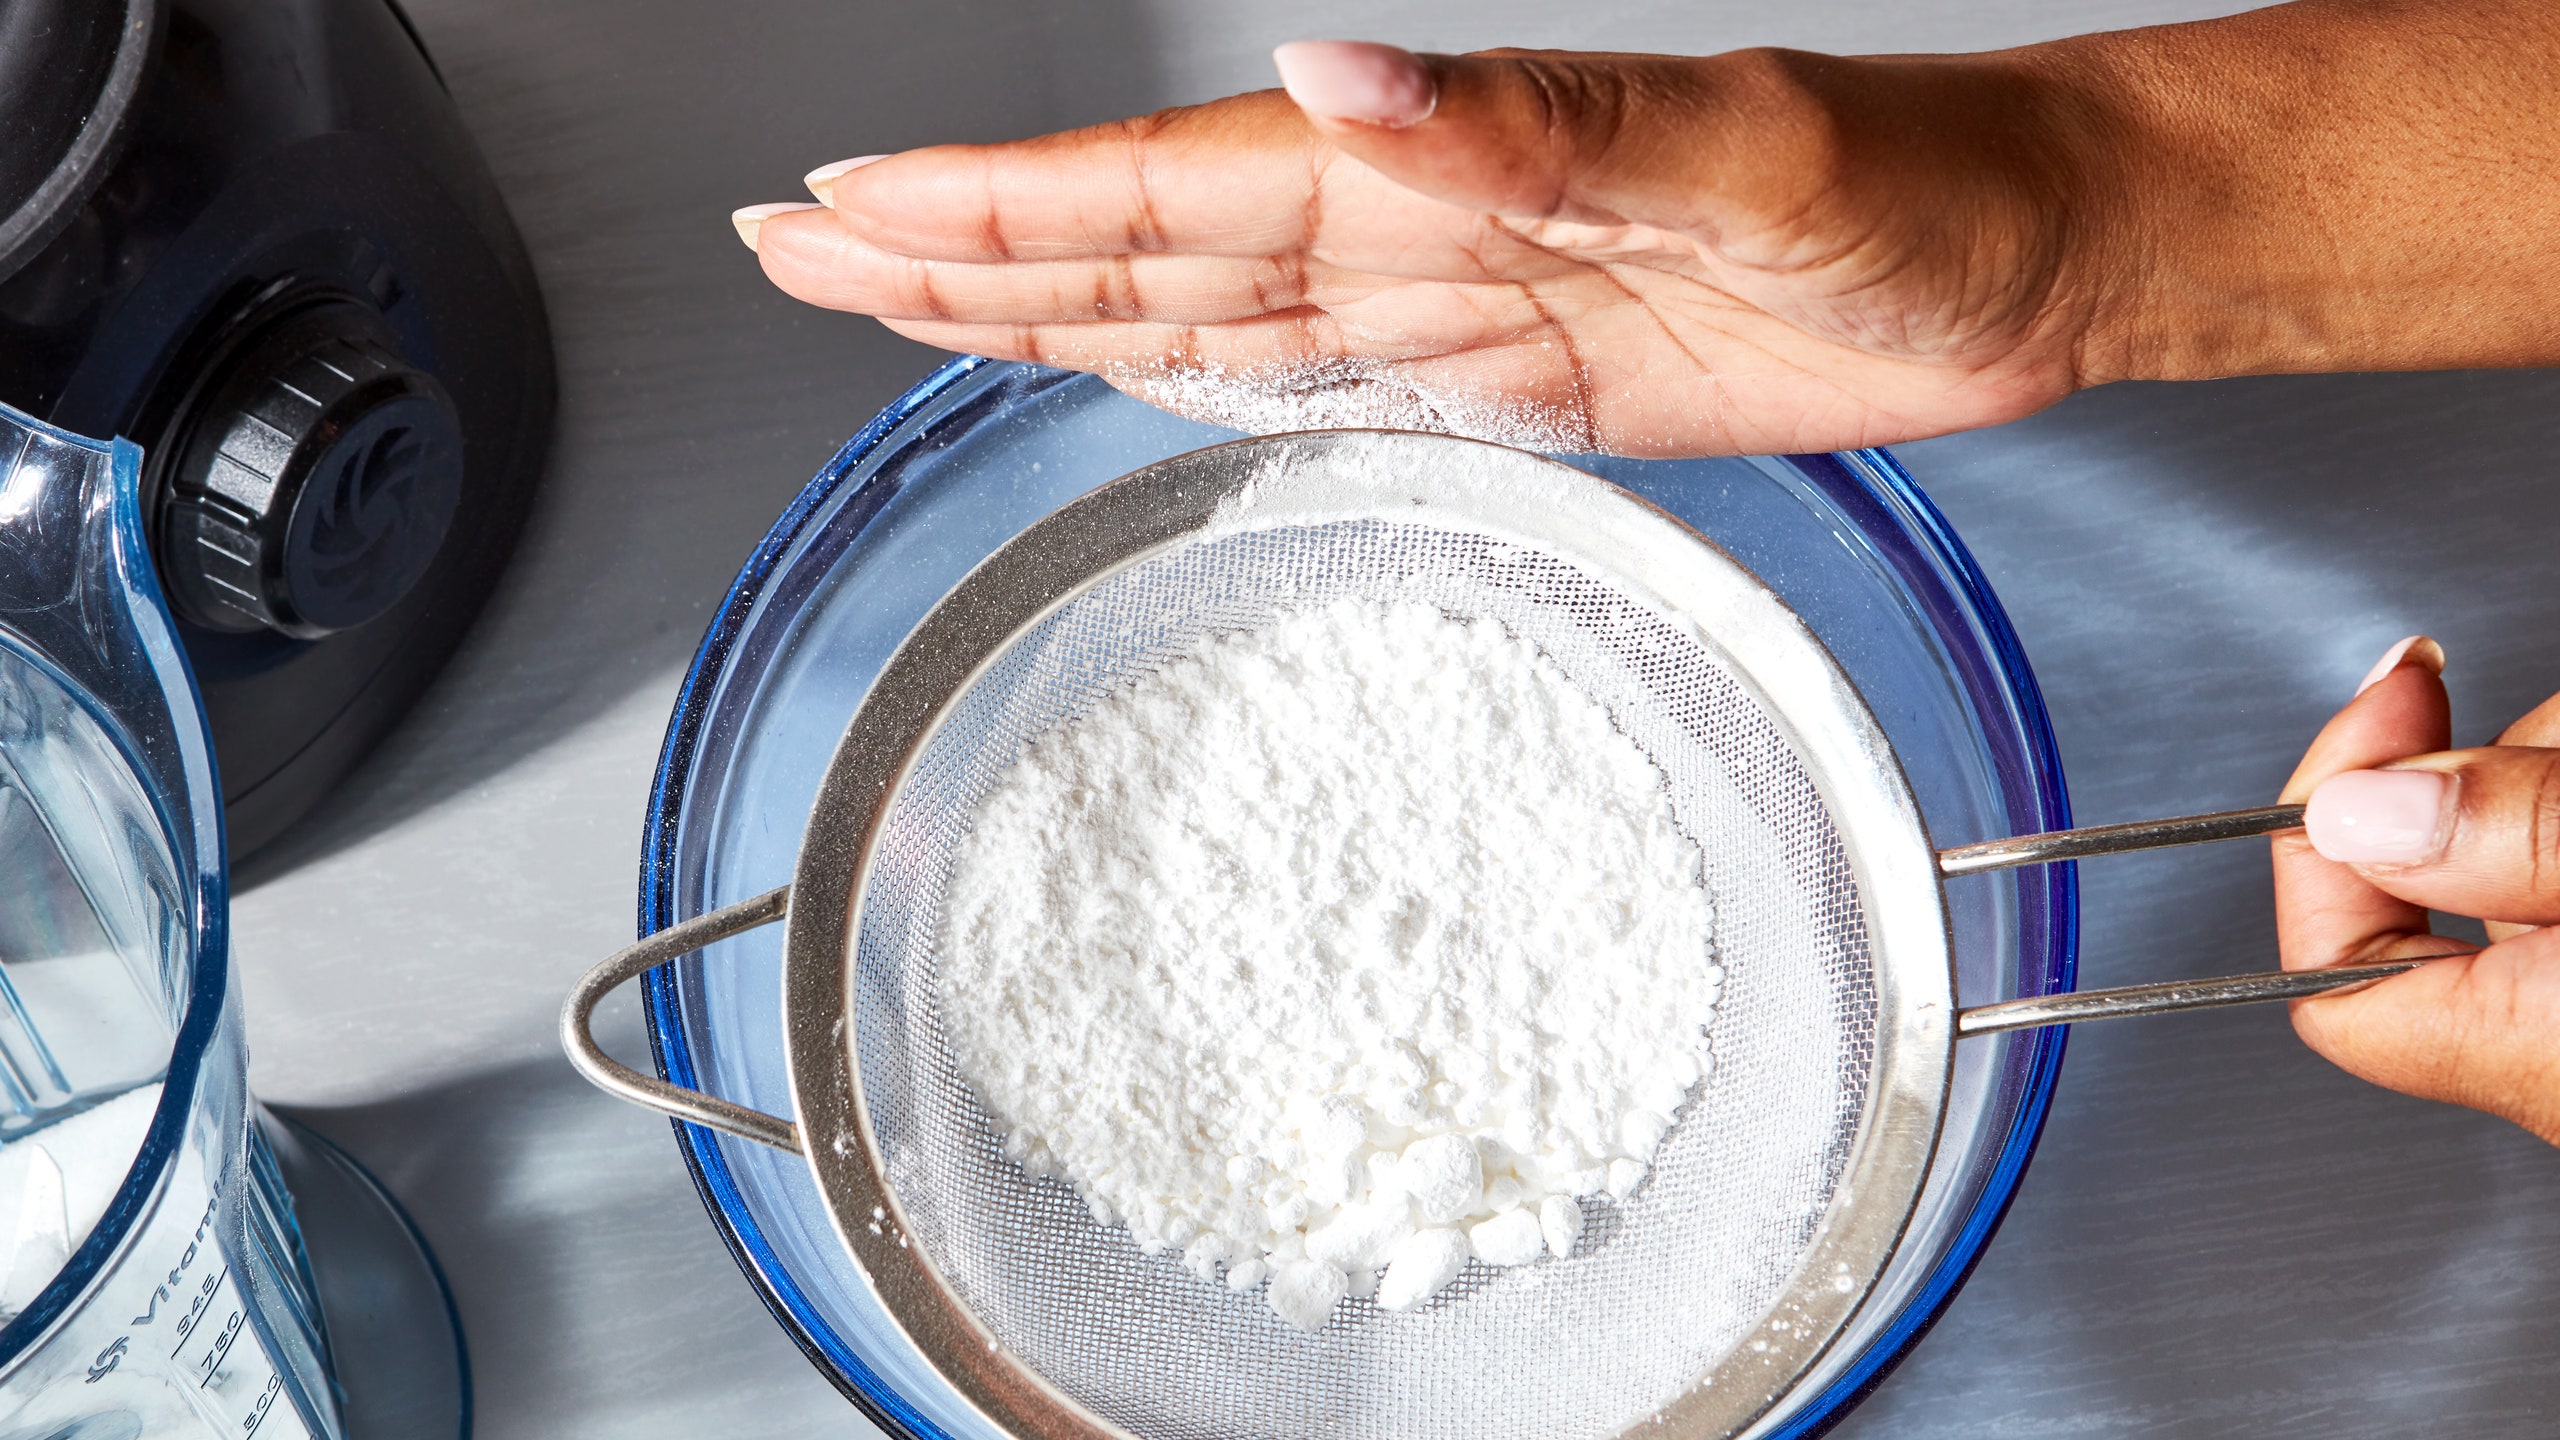 How To Make Powdered Sugar Without Blender